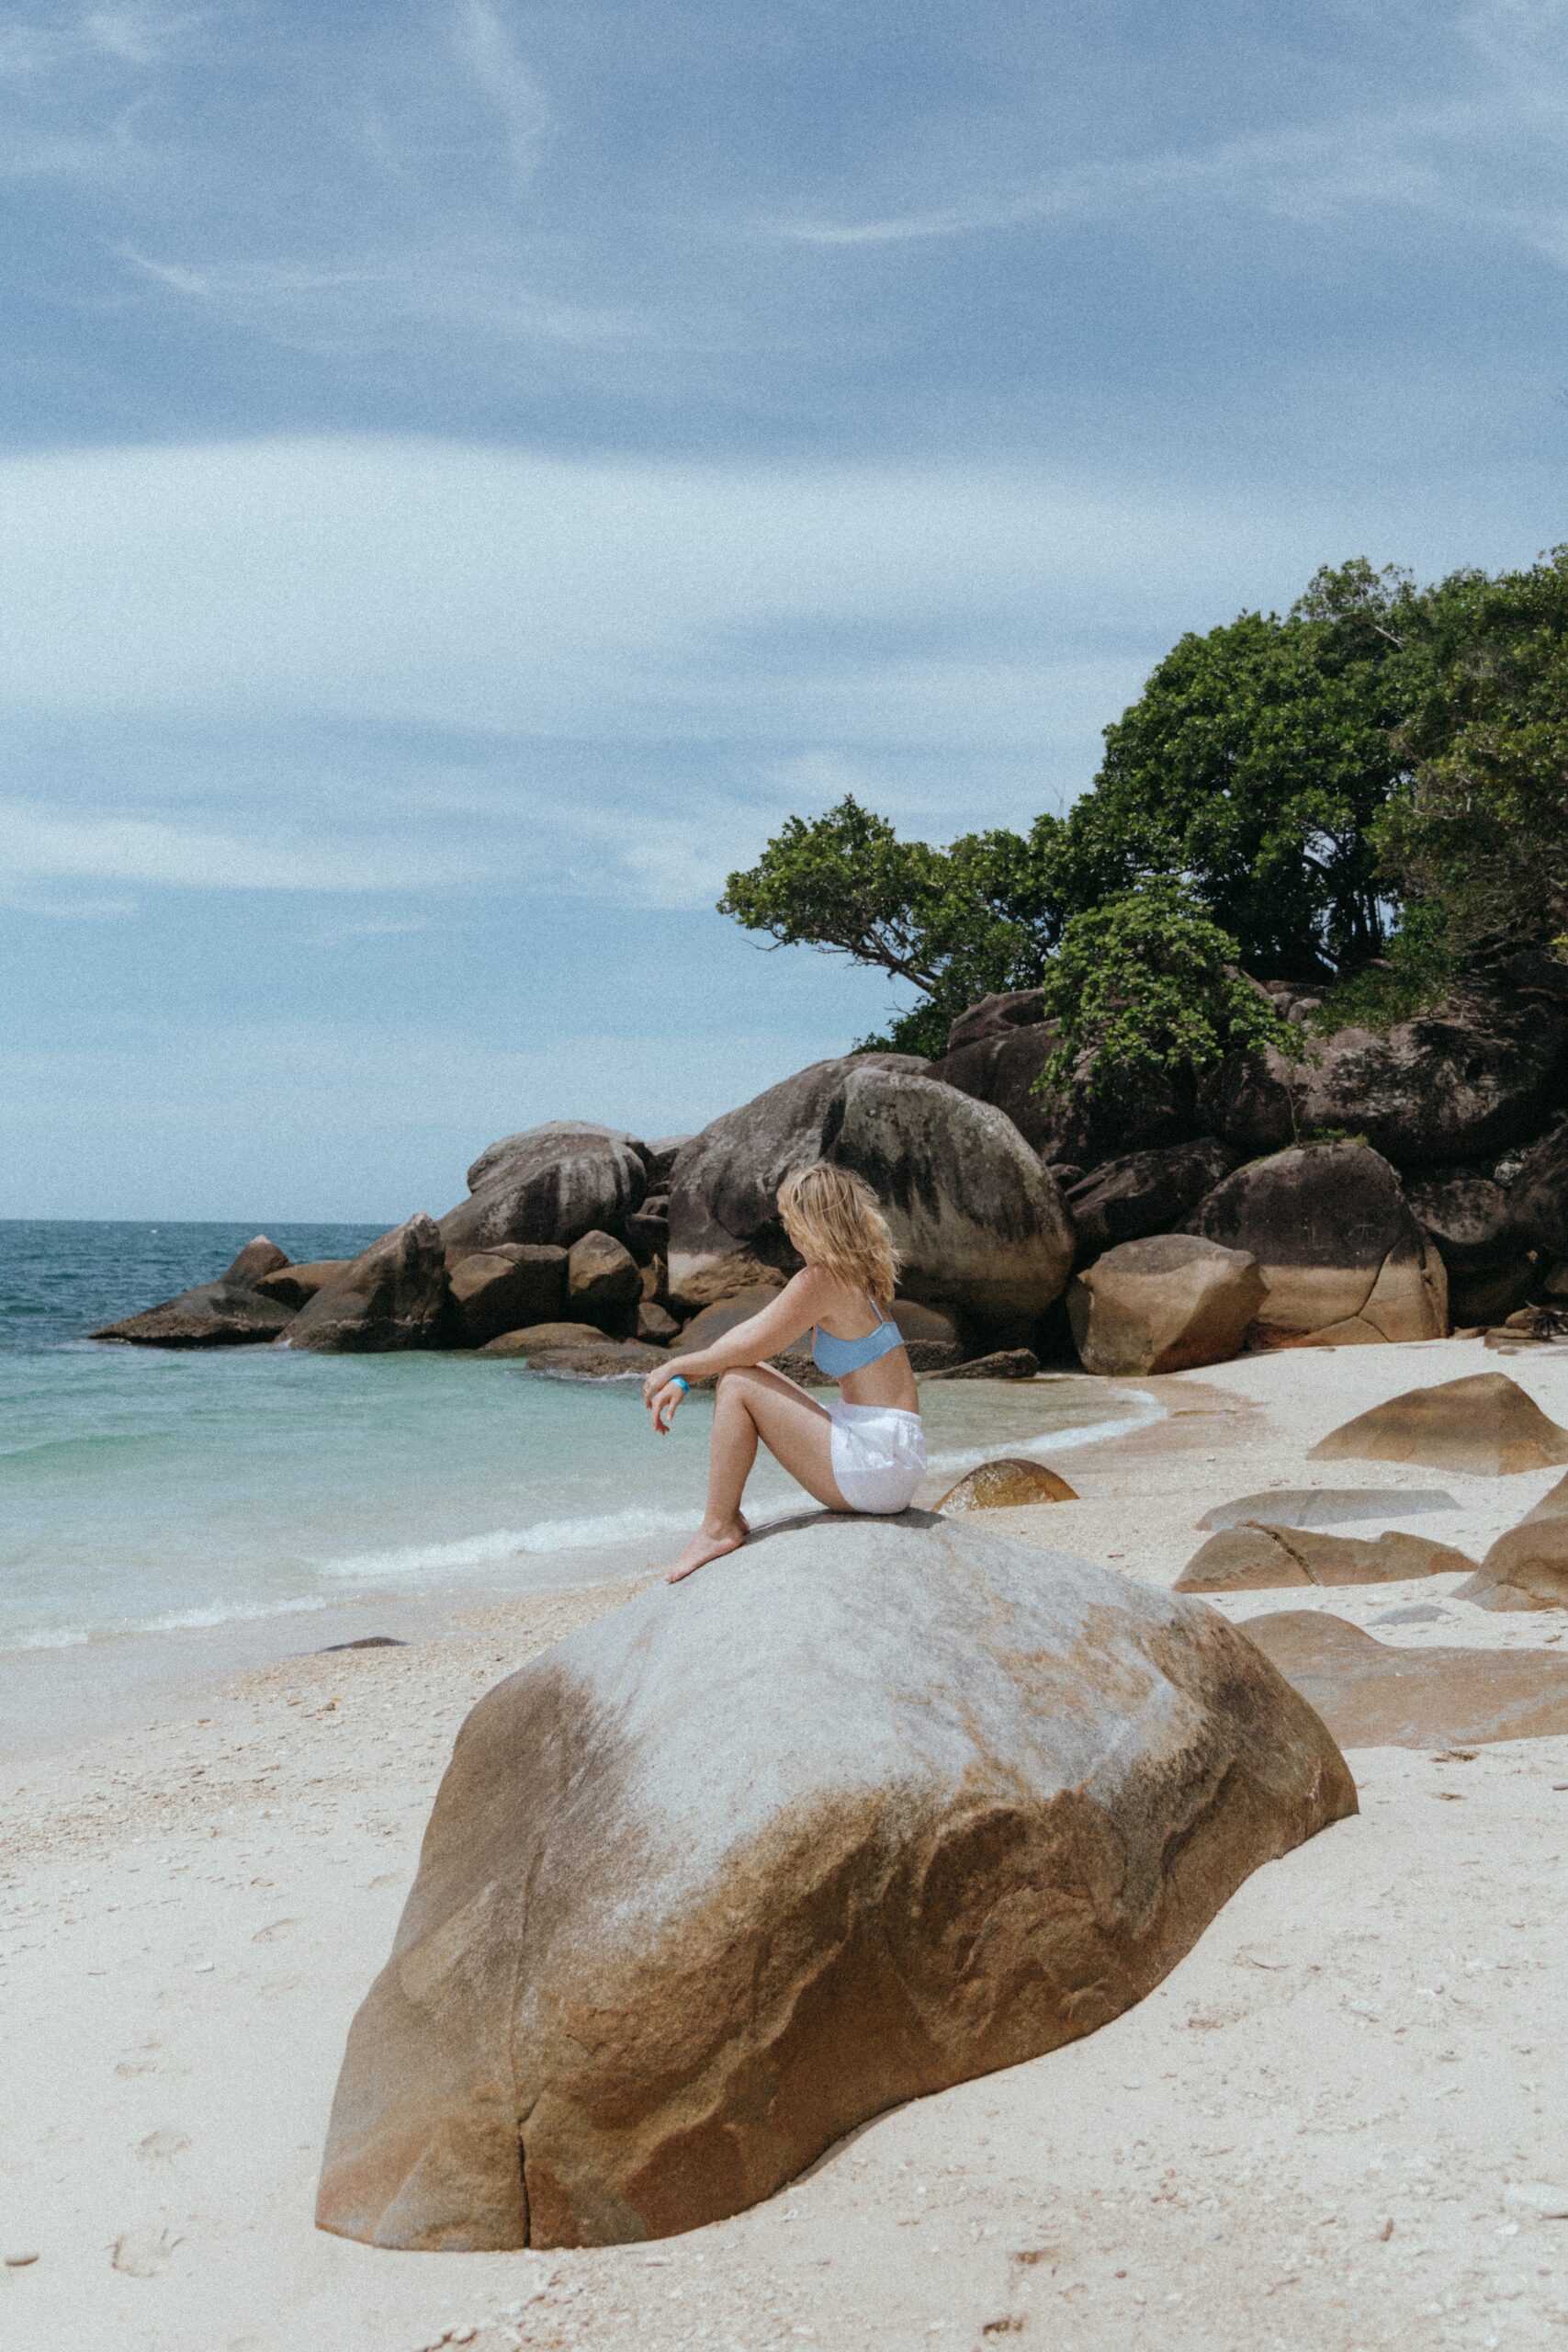 best things to do on fitzroy island